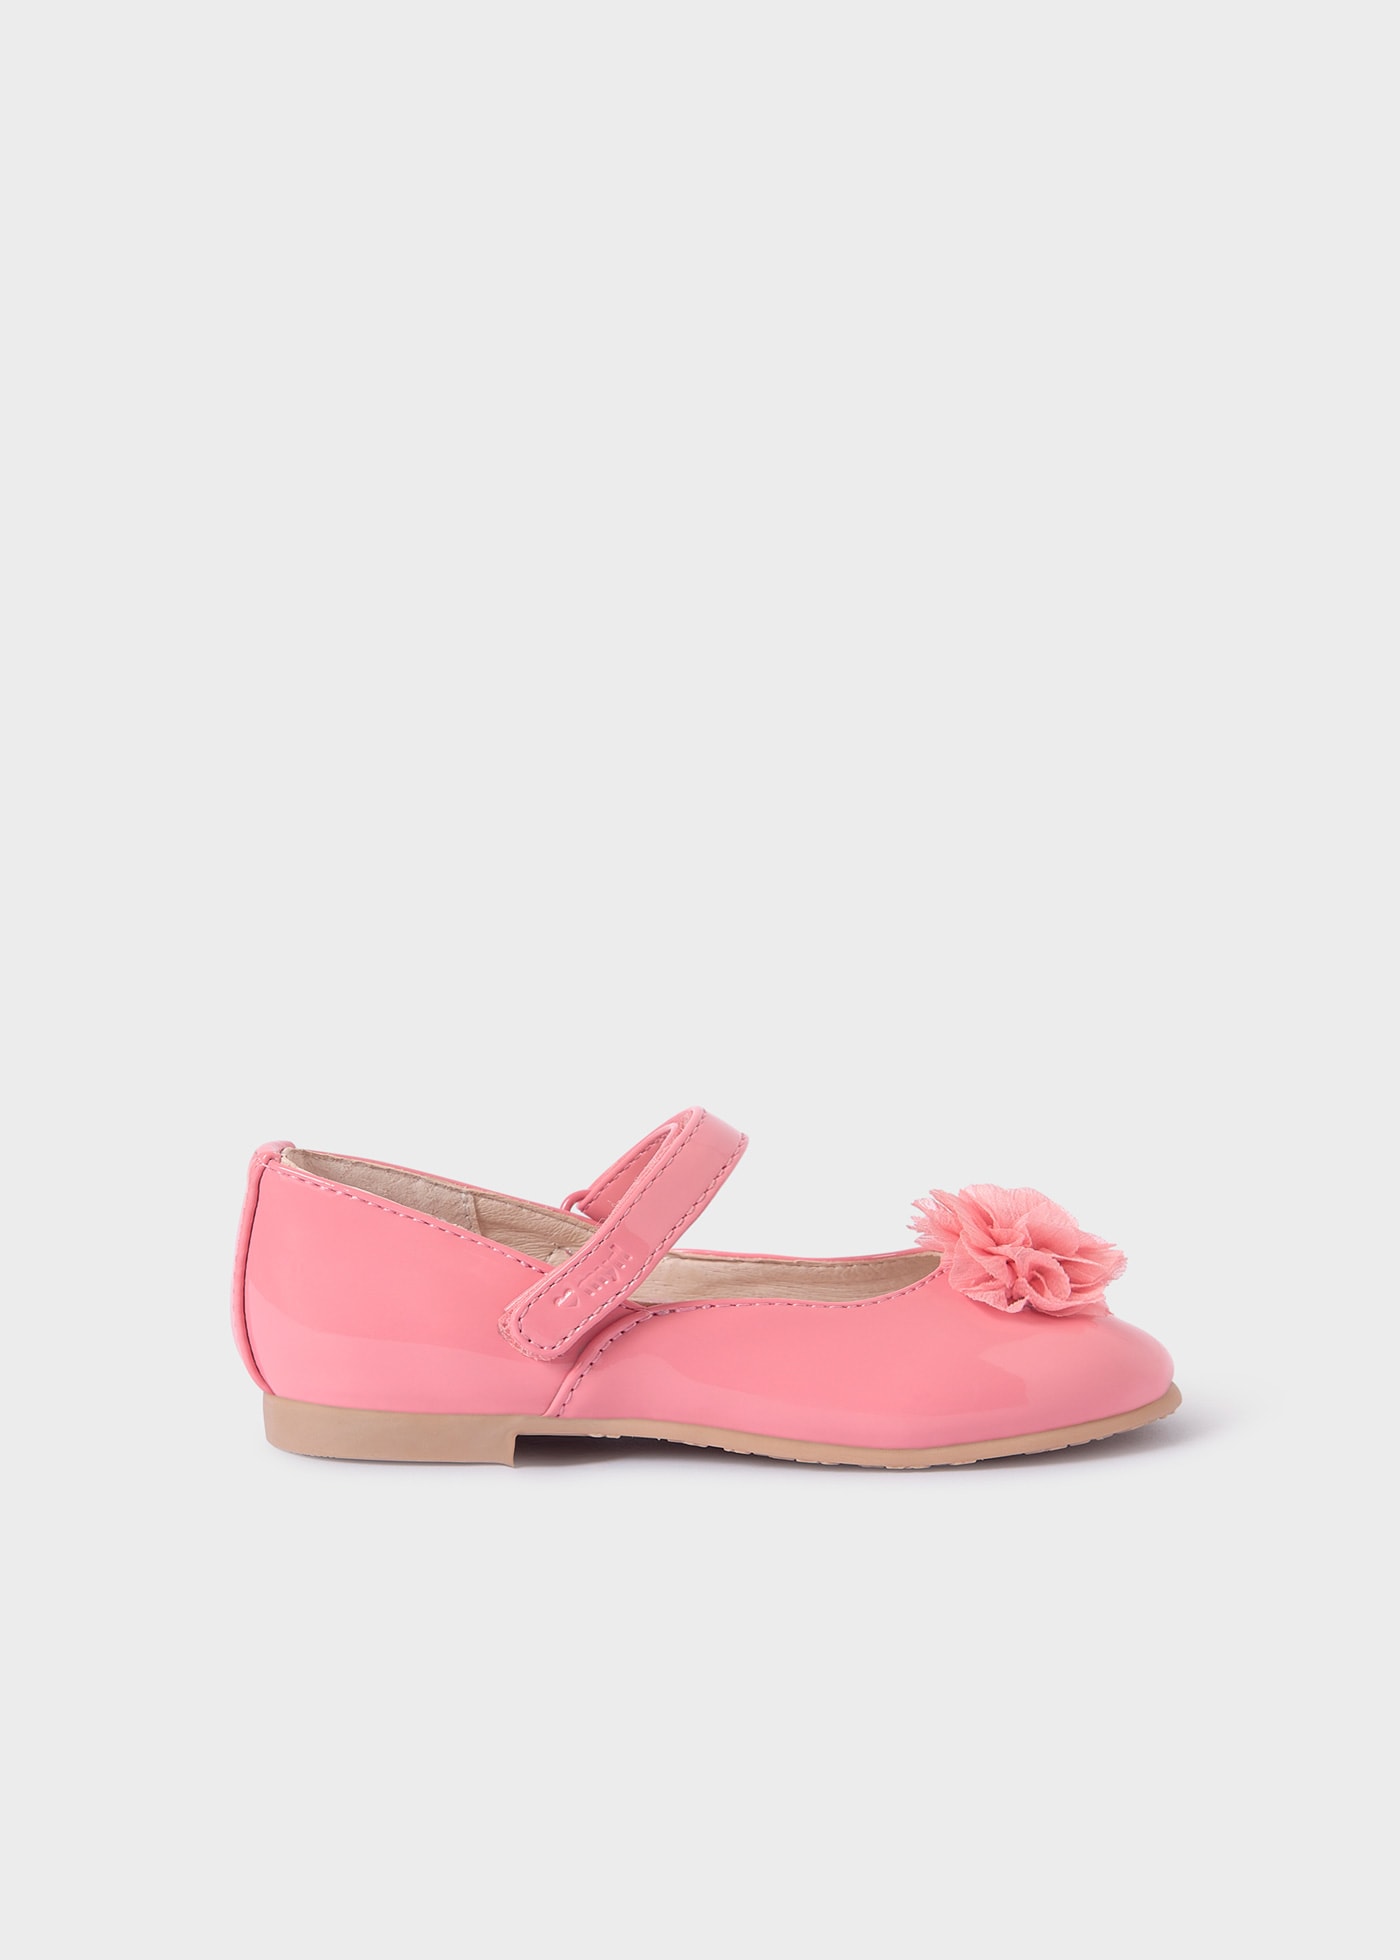 Girls mary jane sustainable patent leather